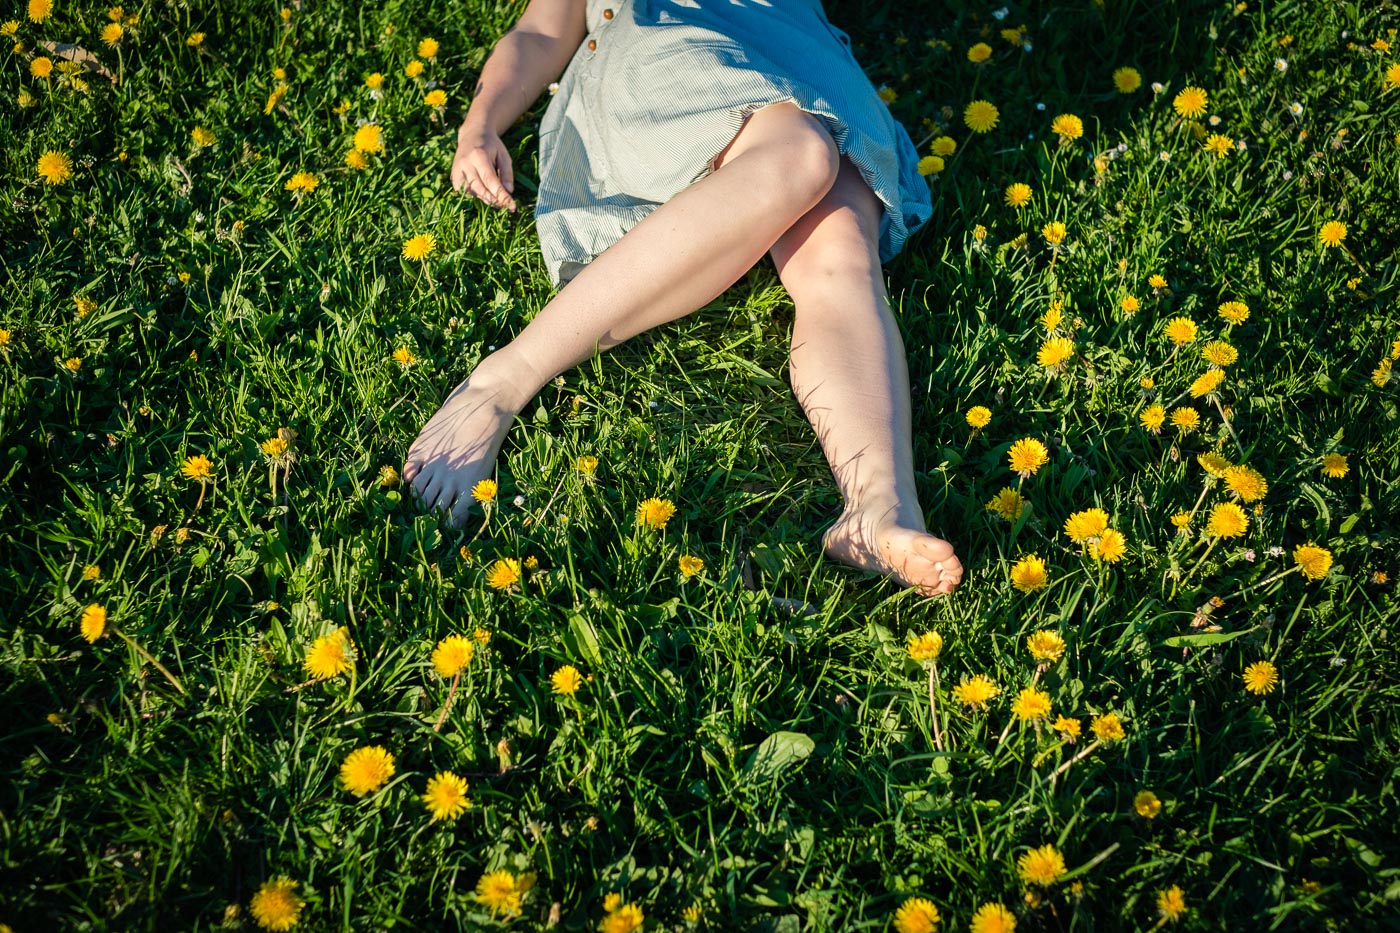 Young woman lying down in dandelion field in early spring.